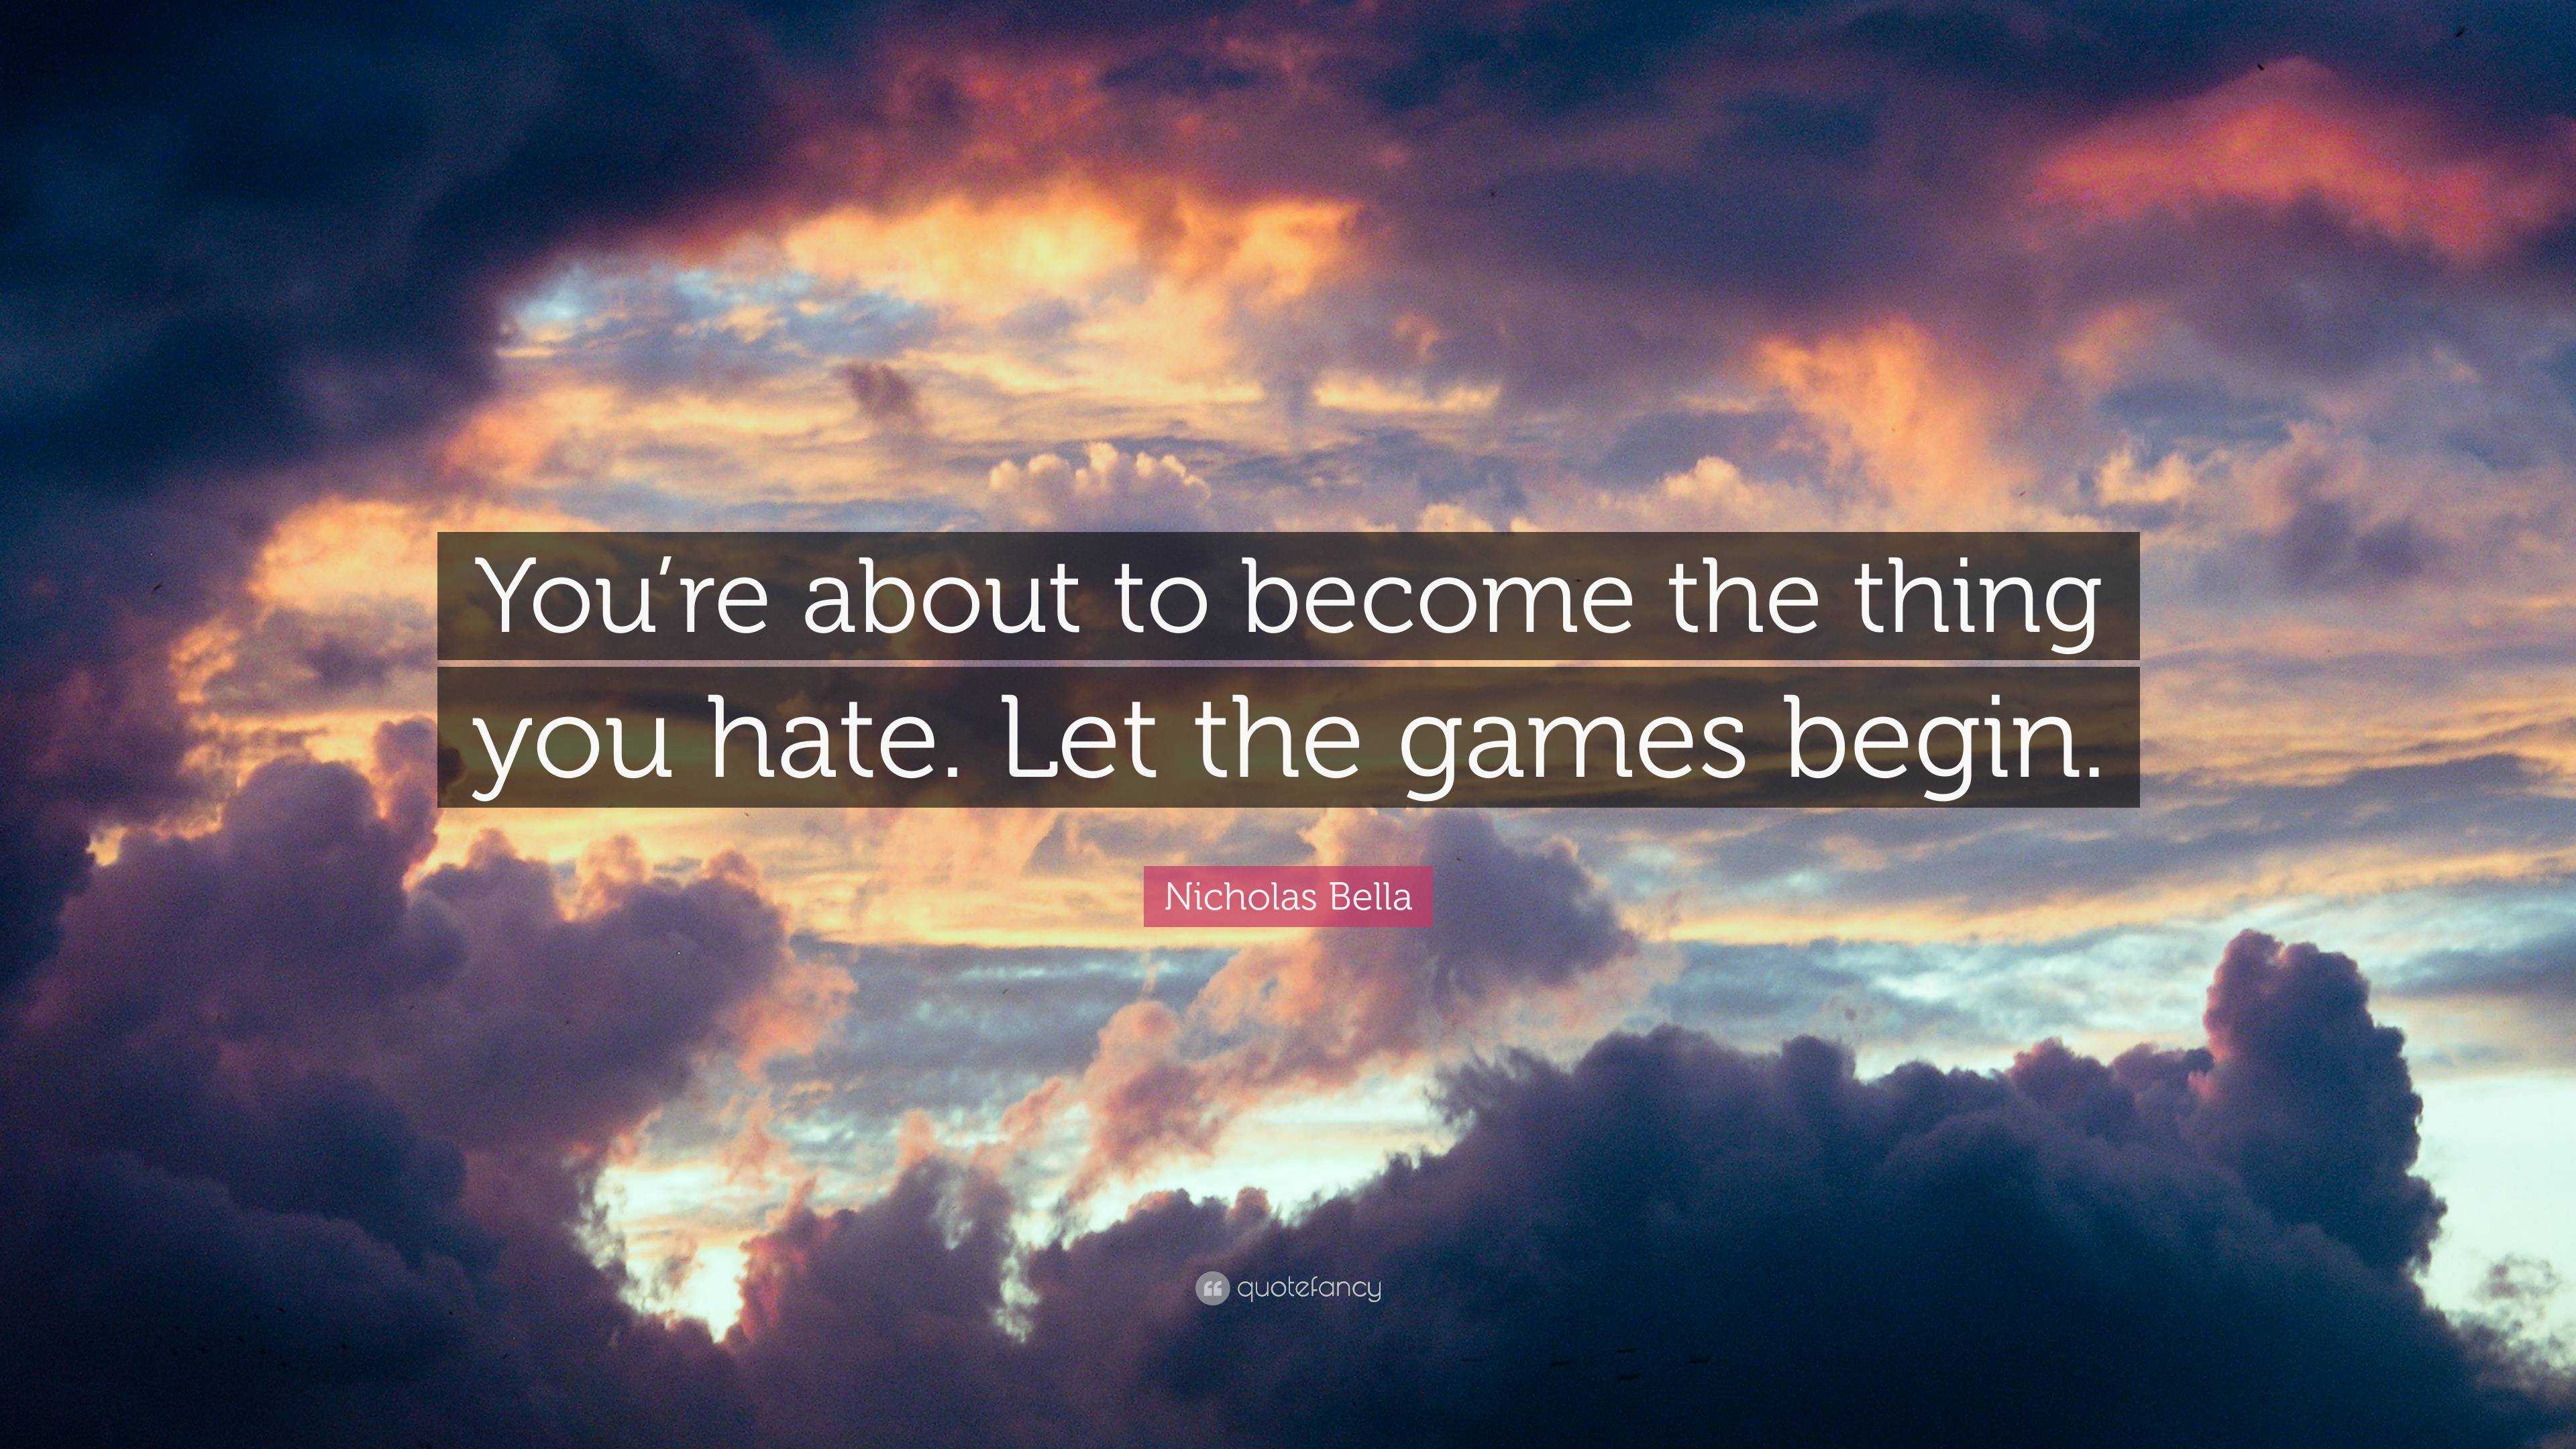 Nicholas Bella Quote: “You're about to become the thing you hate. Let the games  begin.”